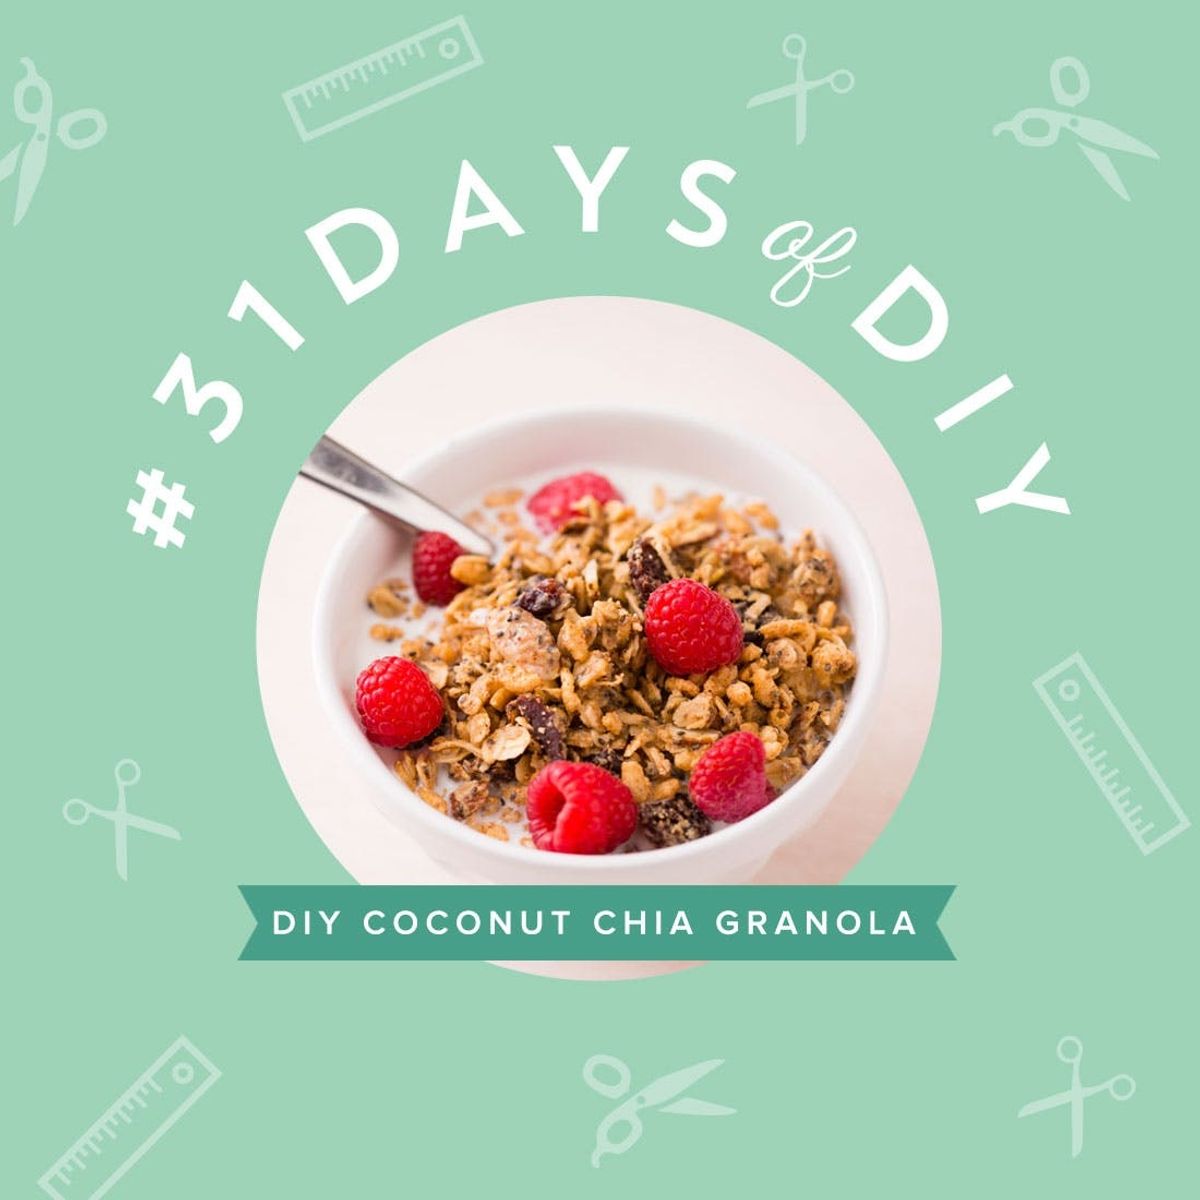 Power Up With Coconut Almond Chia Granola